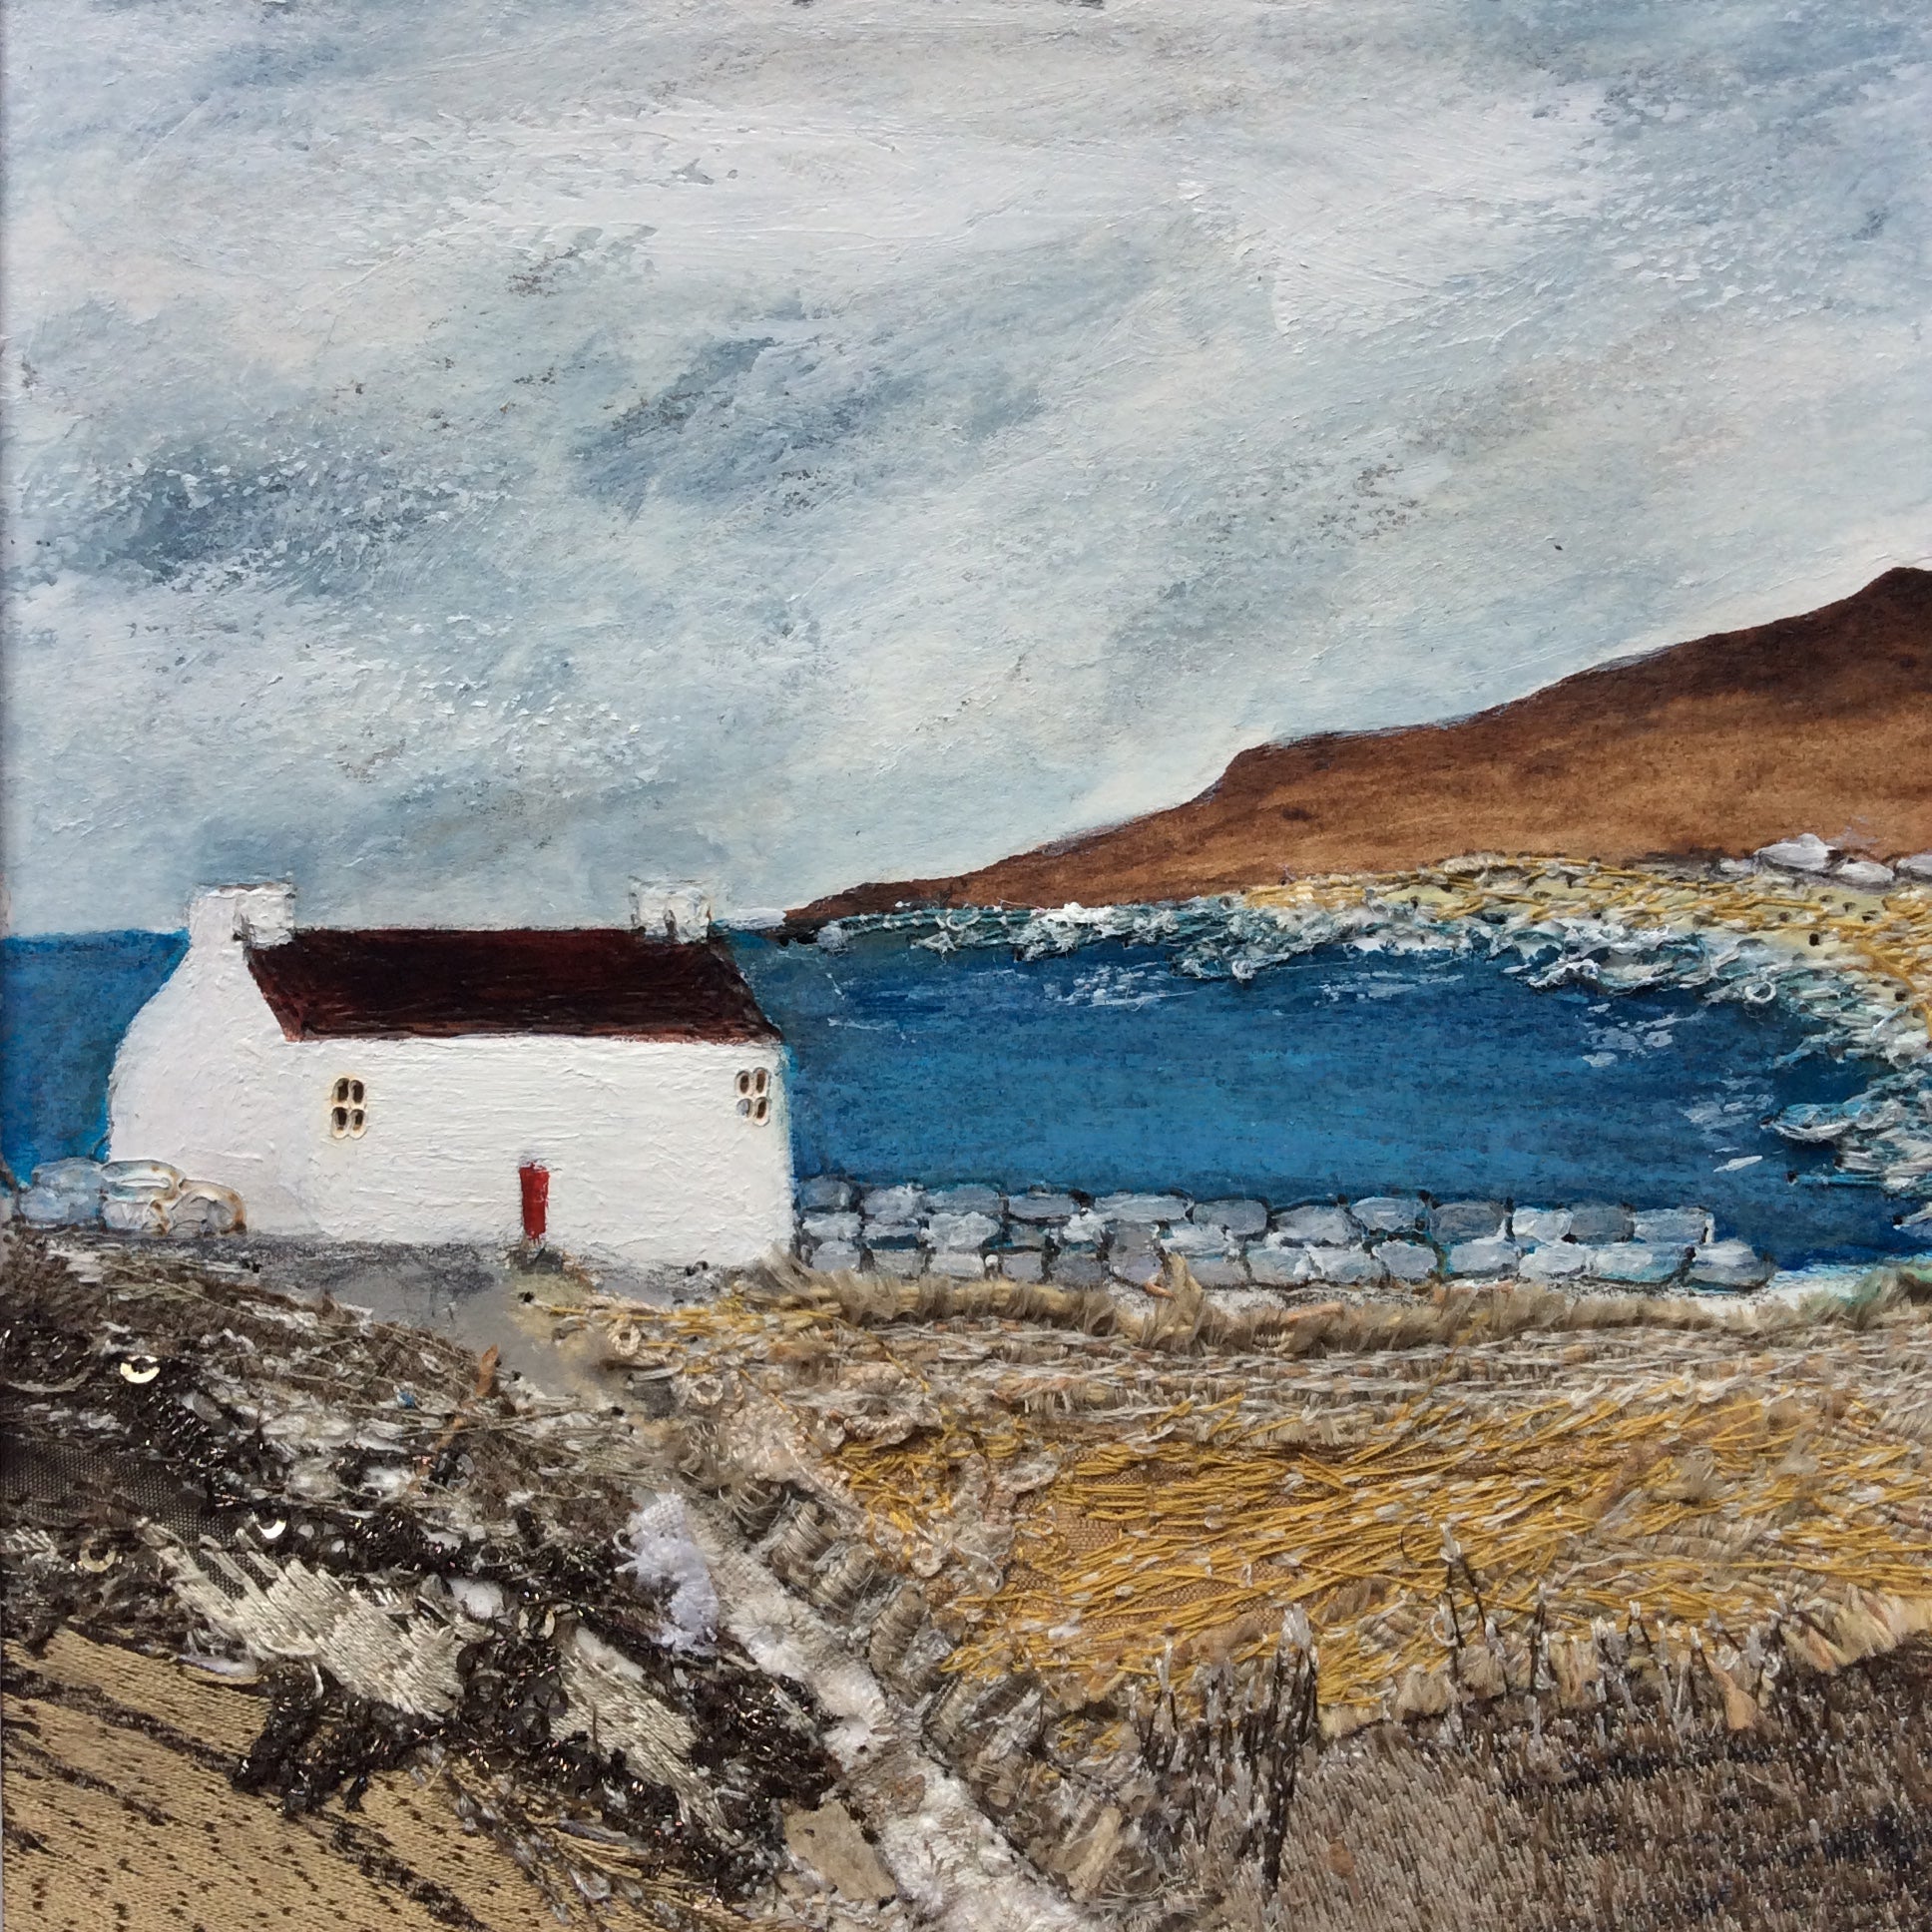 Mixed Media Art By Louise O'Hara - "Down by the Shore"